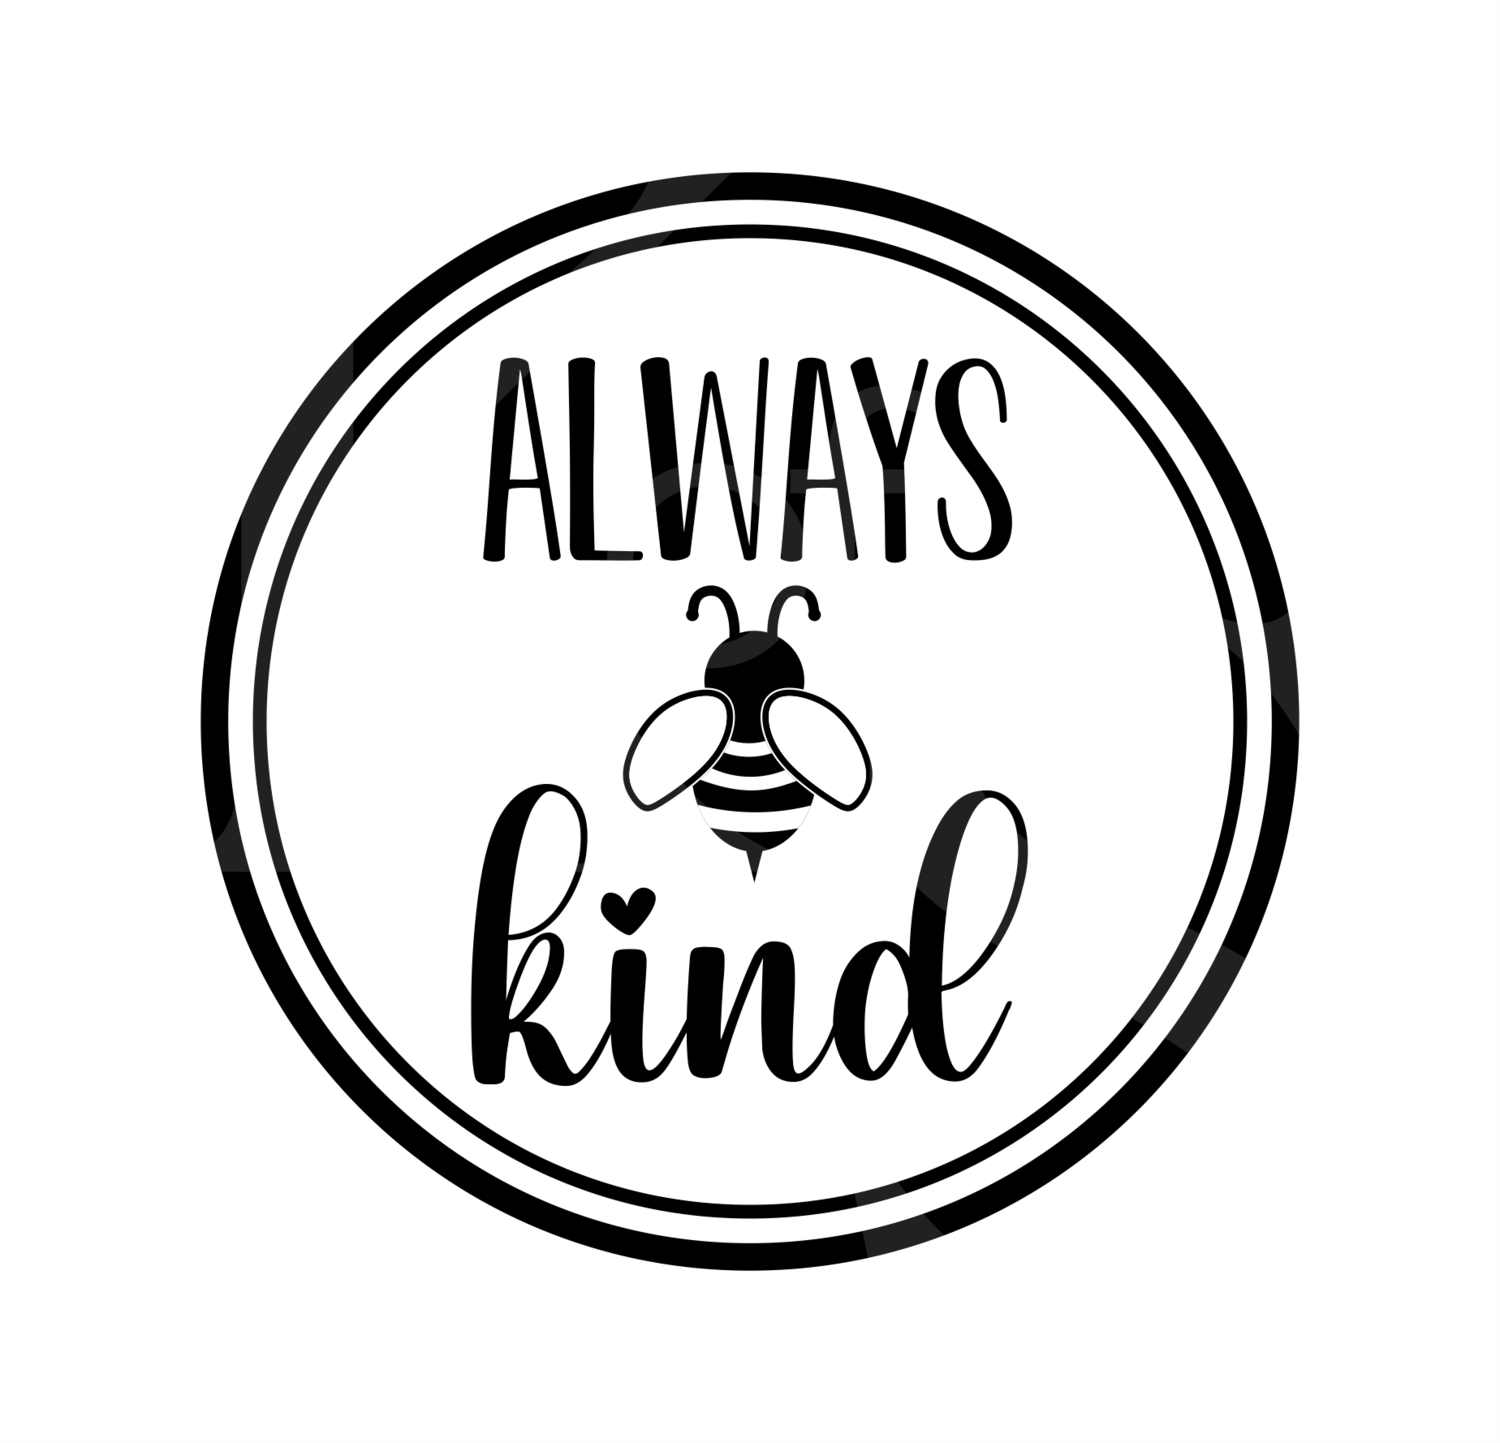 Always Bee Kind svg, Be Kind svg, Quotes svg, Kindness is contagious svg, SVG Dxf EPS Png Printable Vector Clipart Cut Print File